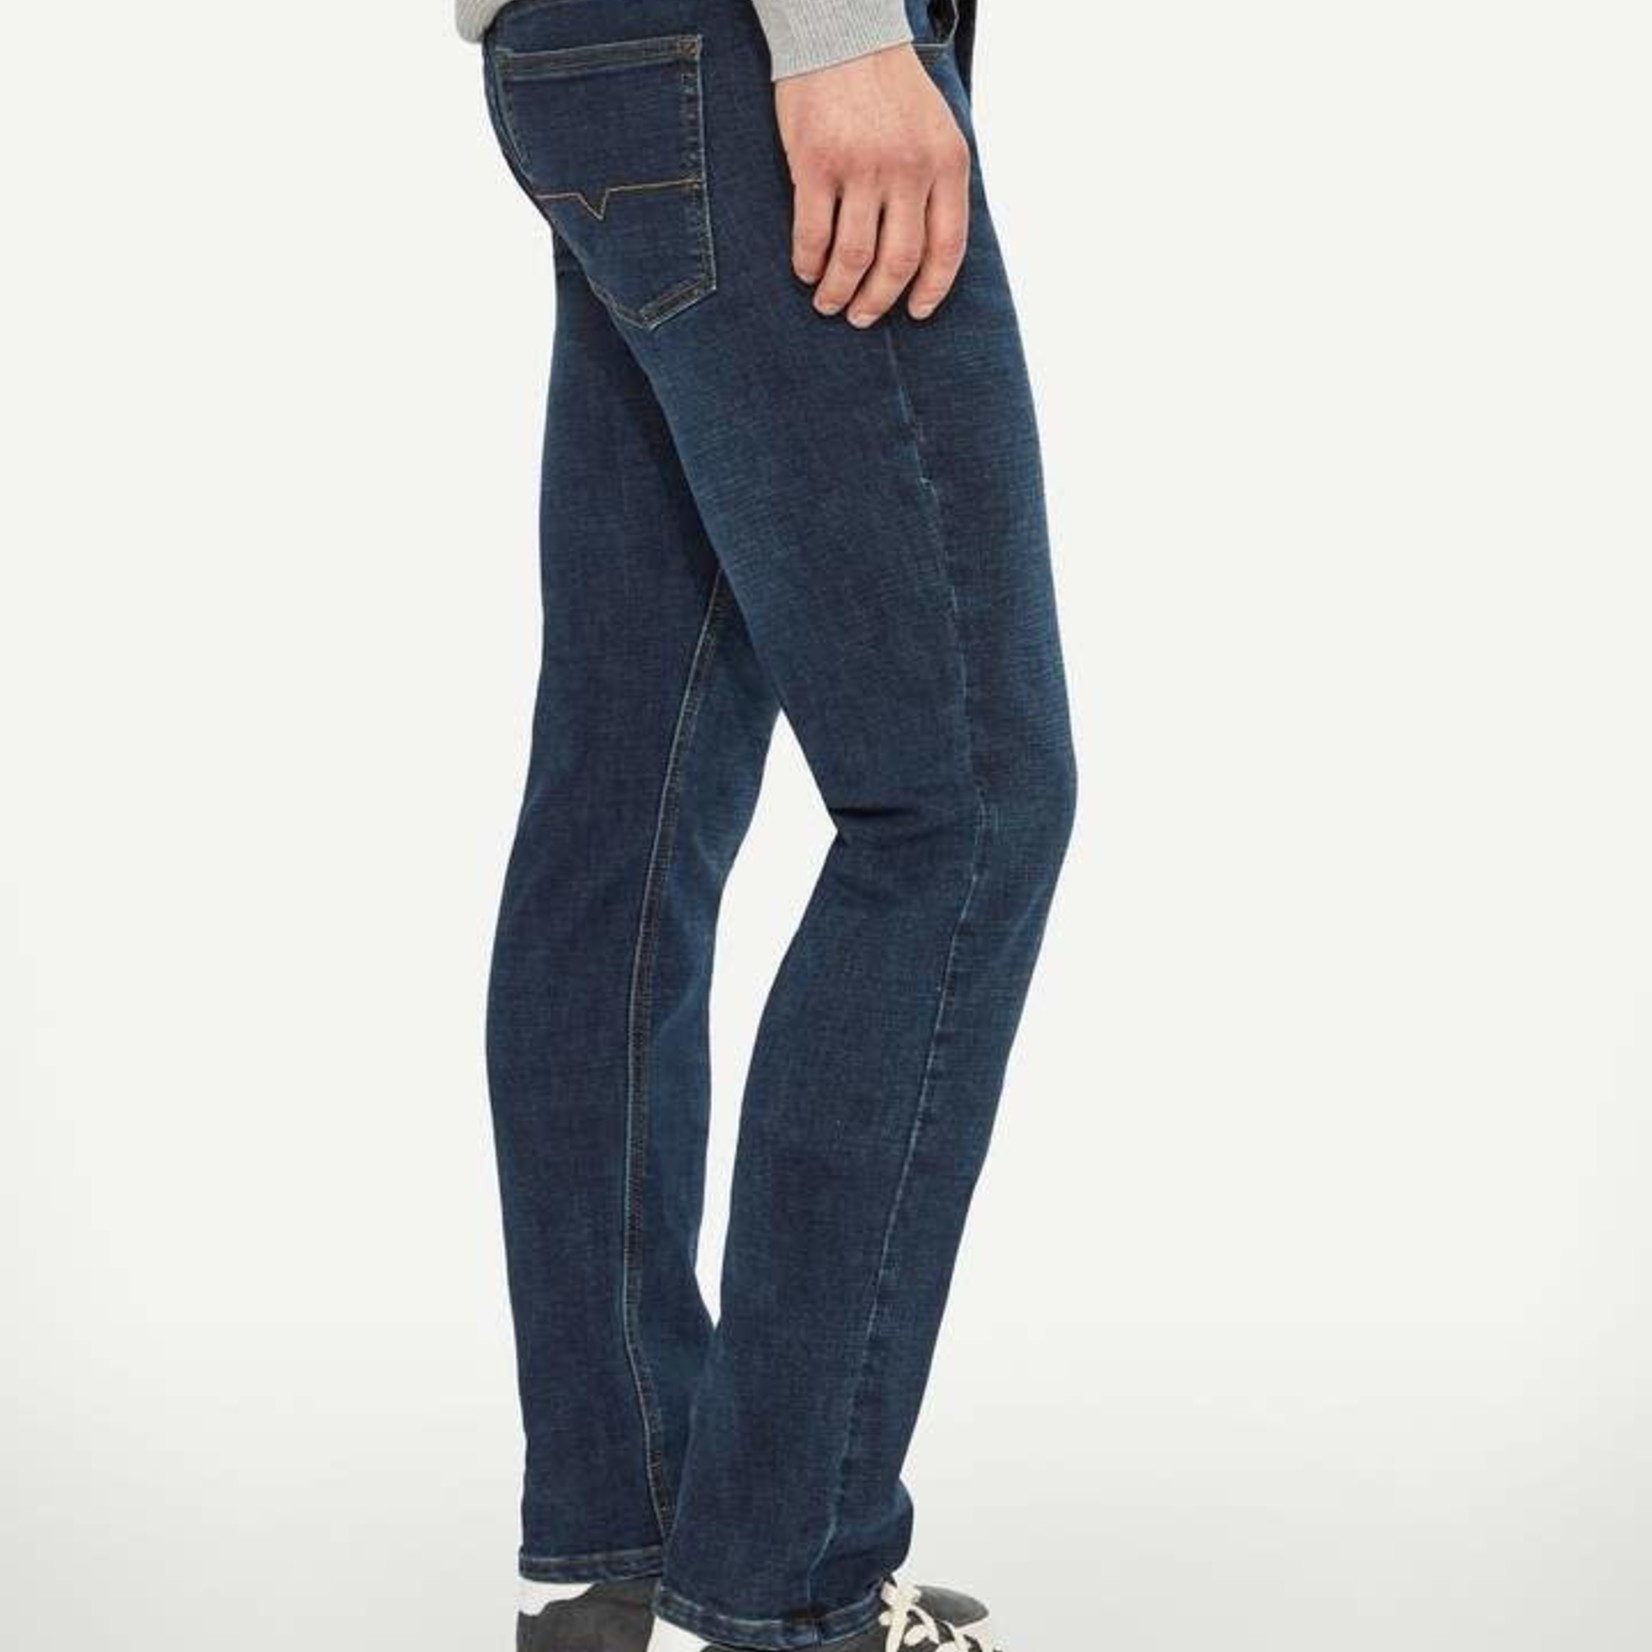 Lois Jeans Canada The "New Star 7142-95" by Lois Jeans